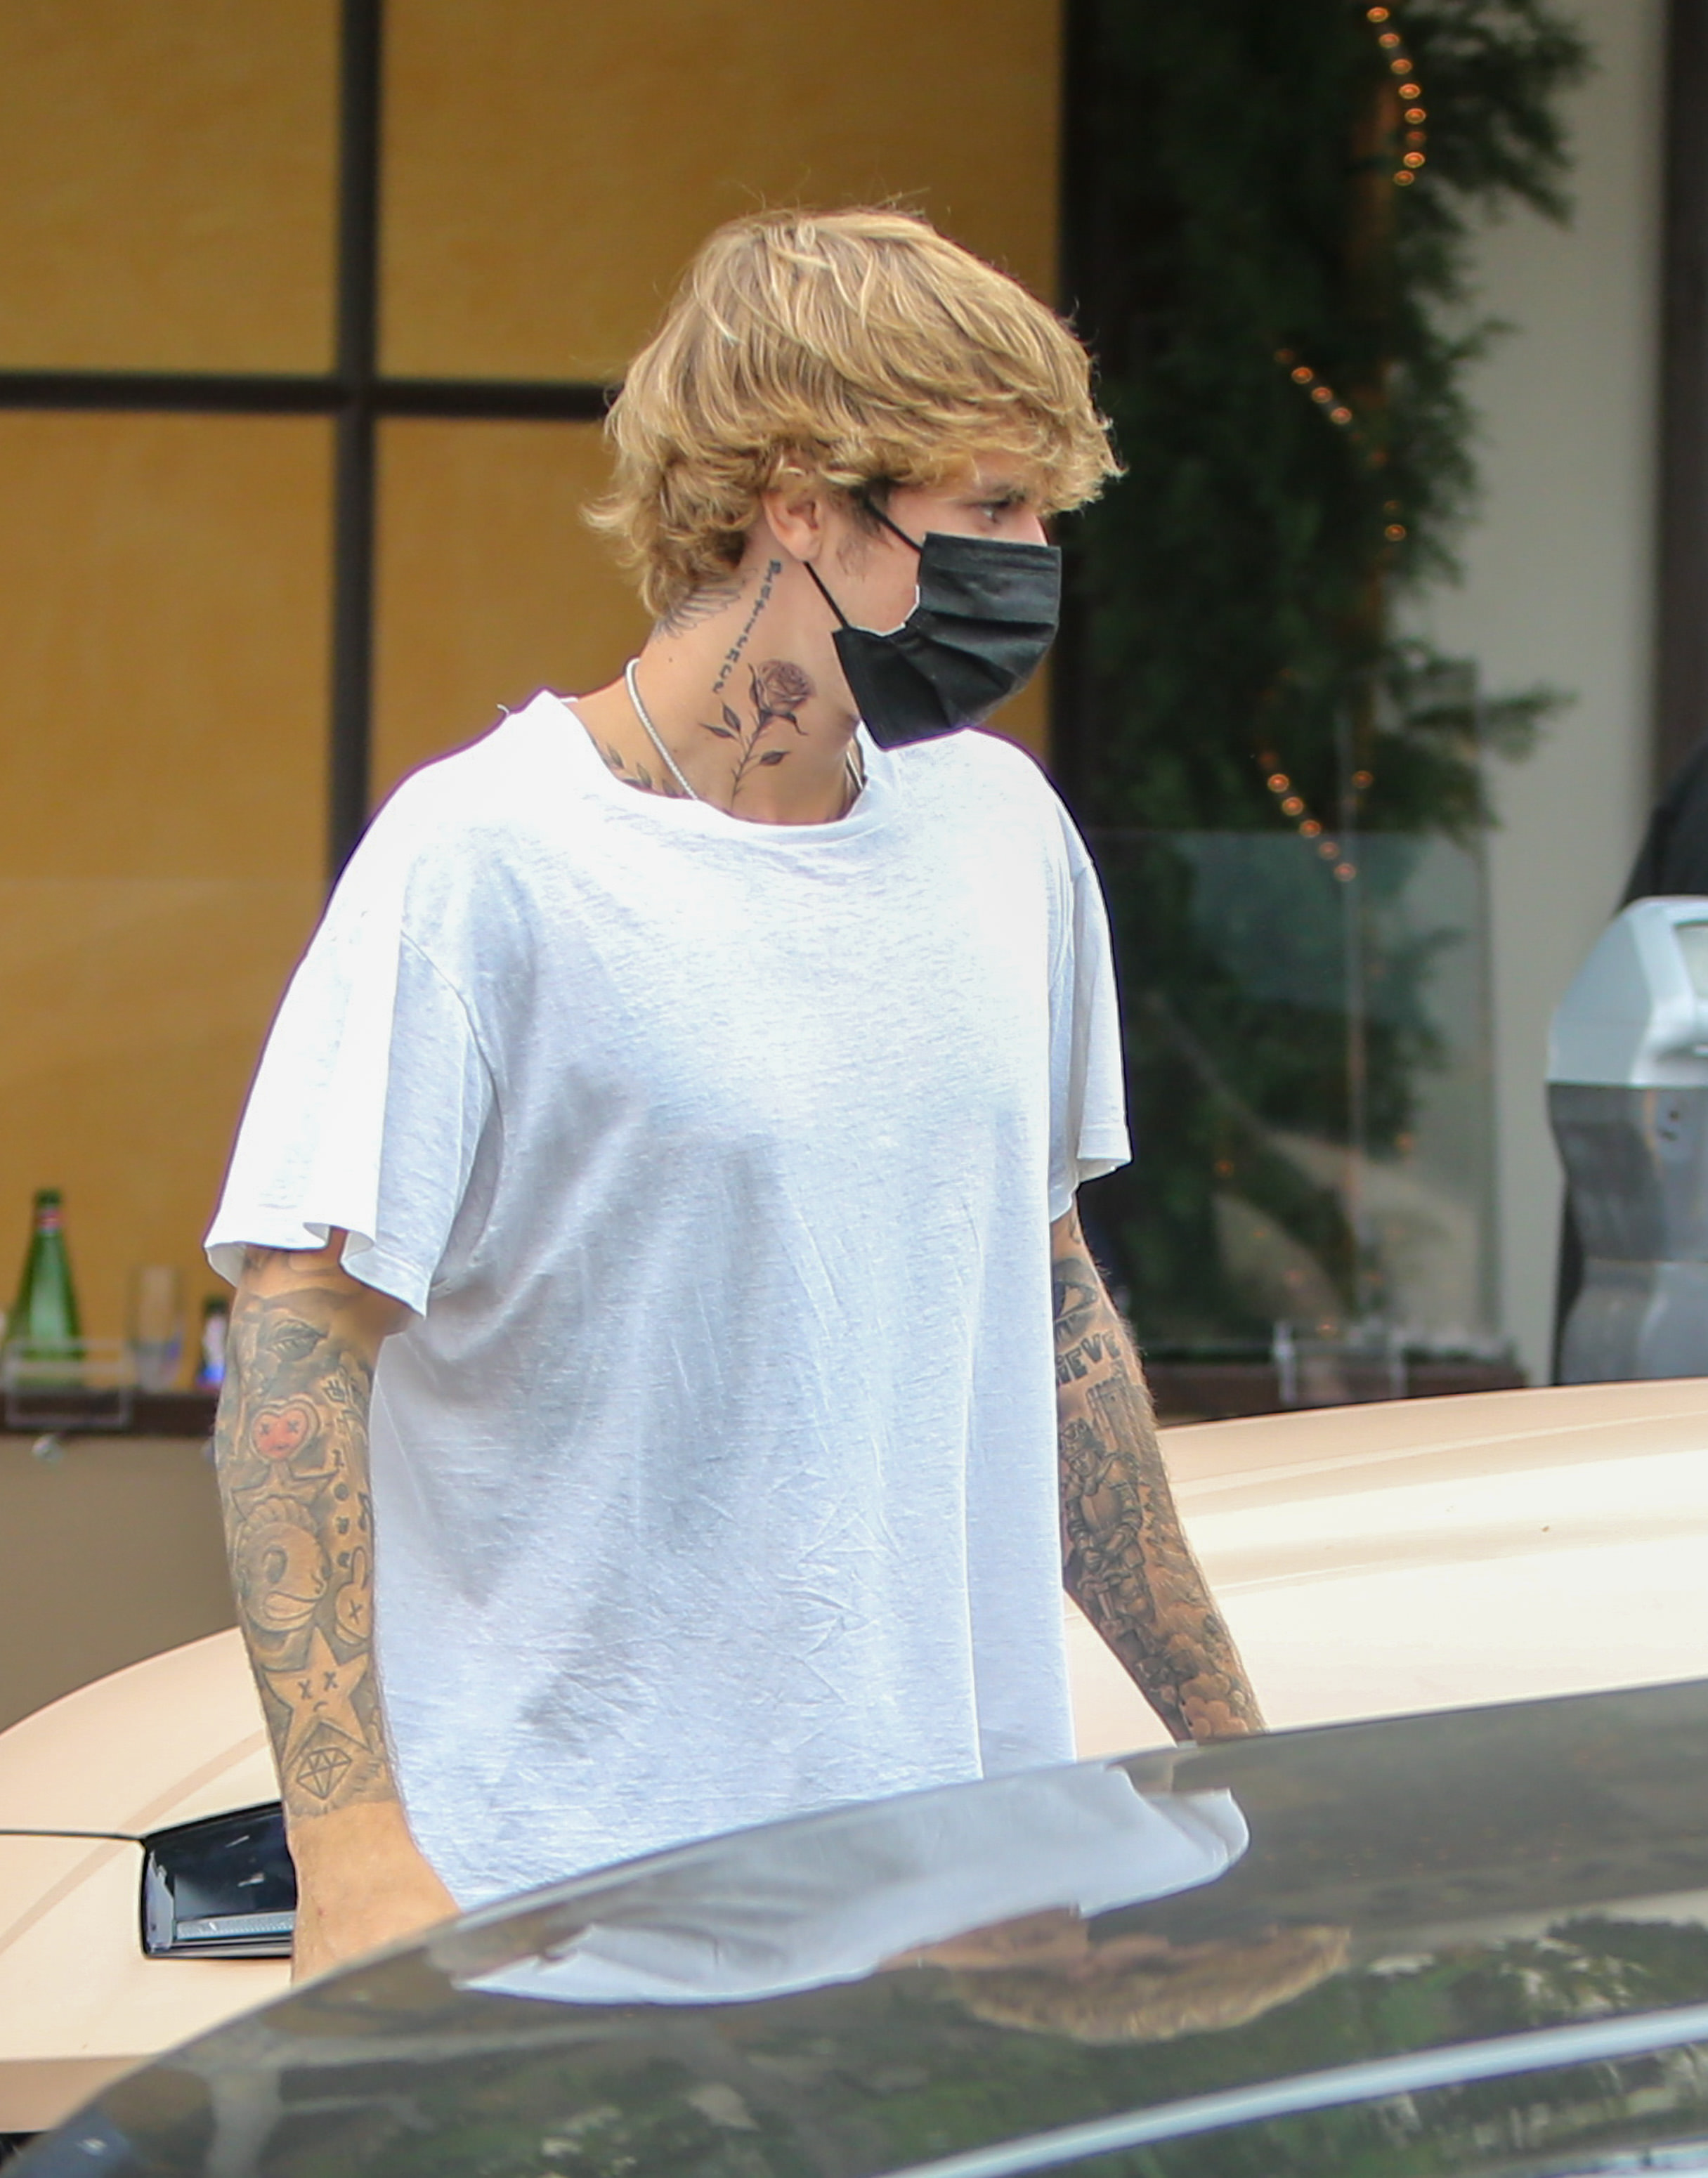 Beliebers are going crazy for Justin's long hair / Twitter